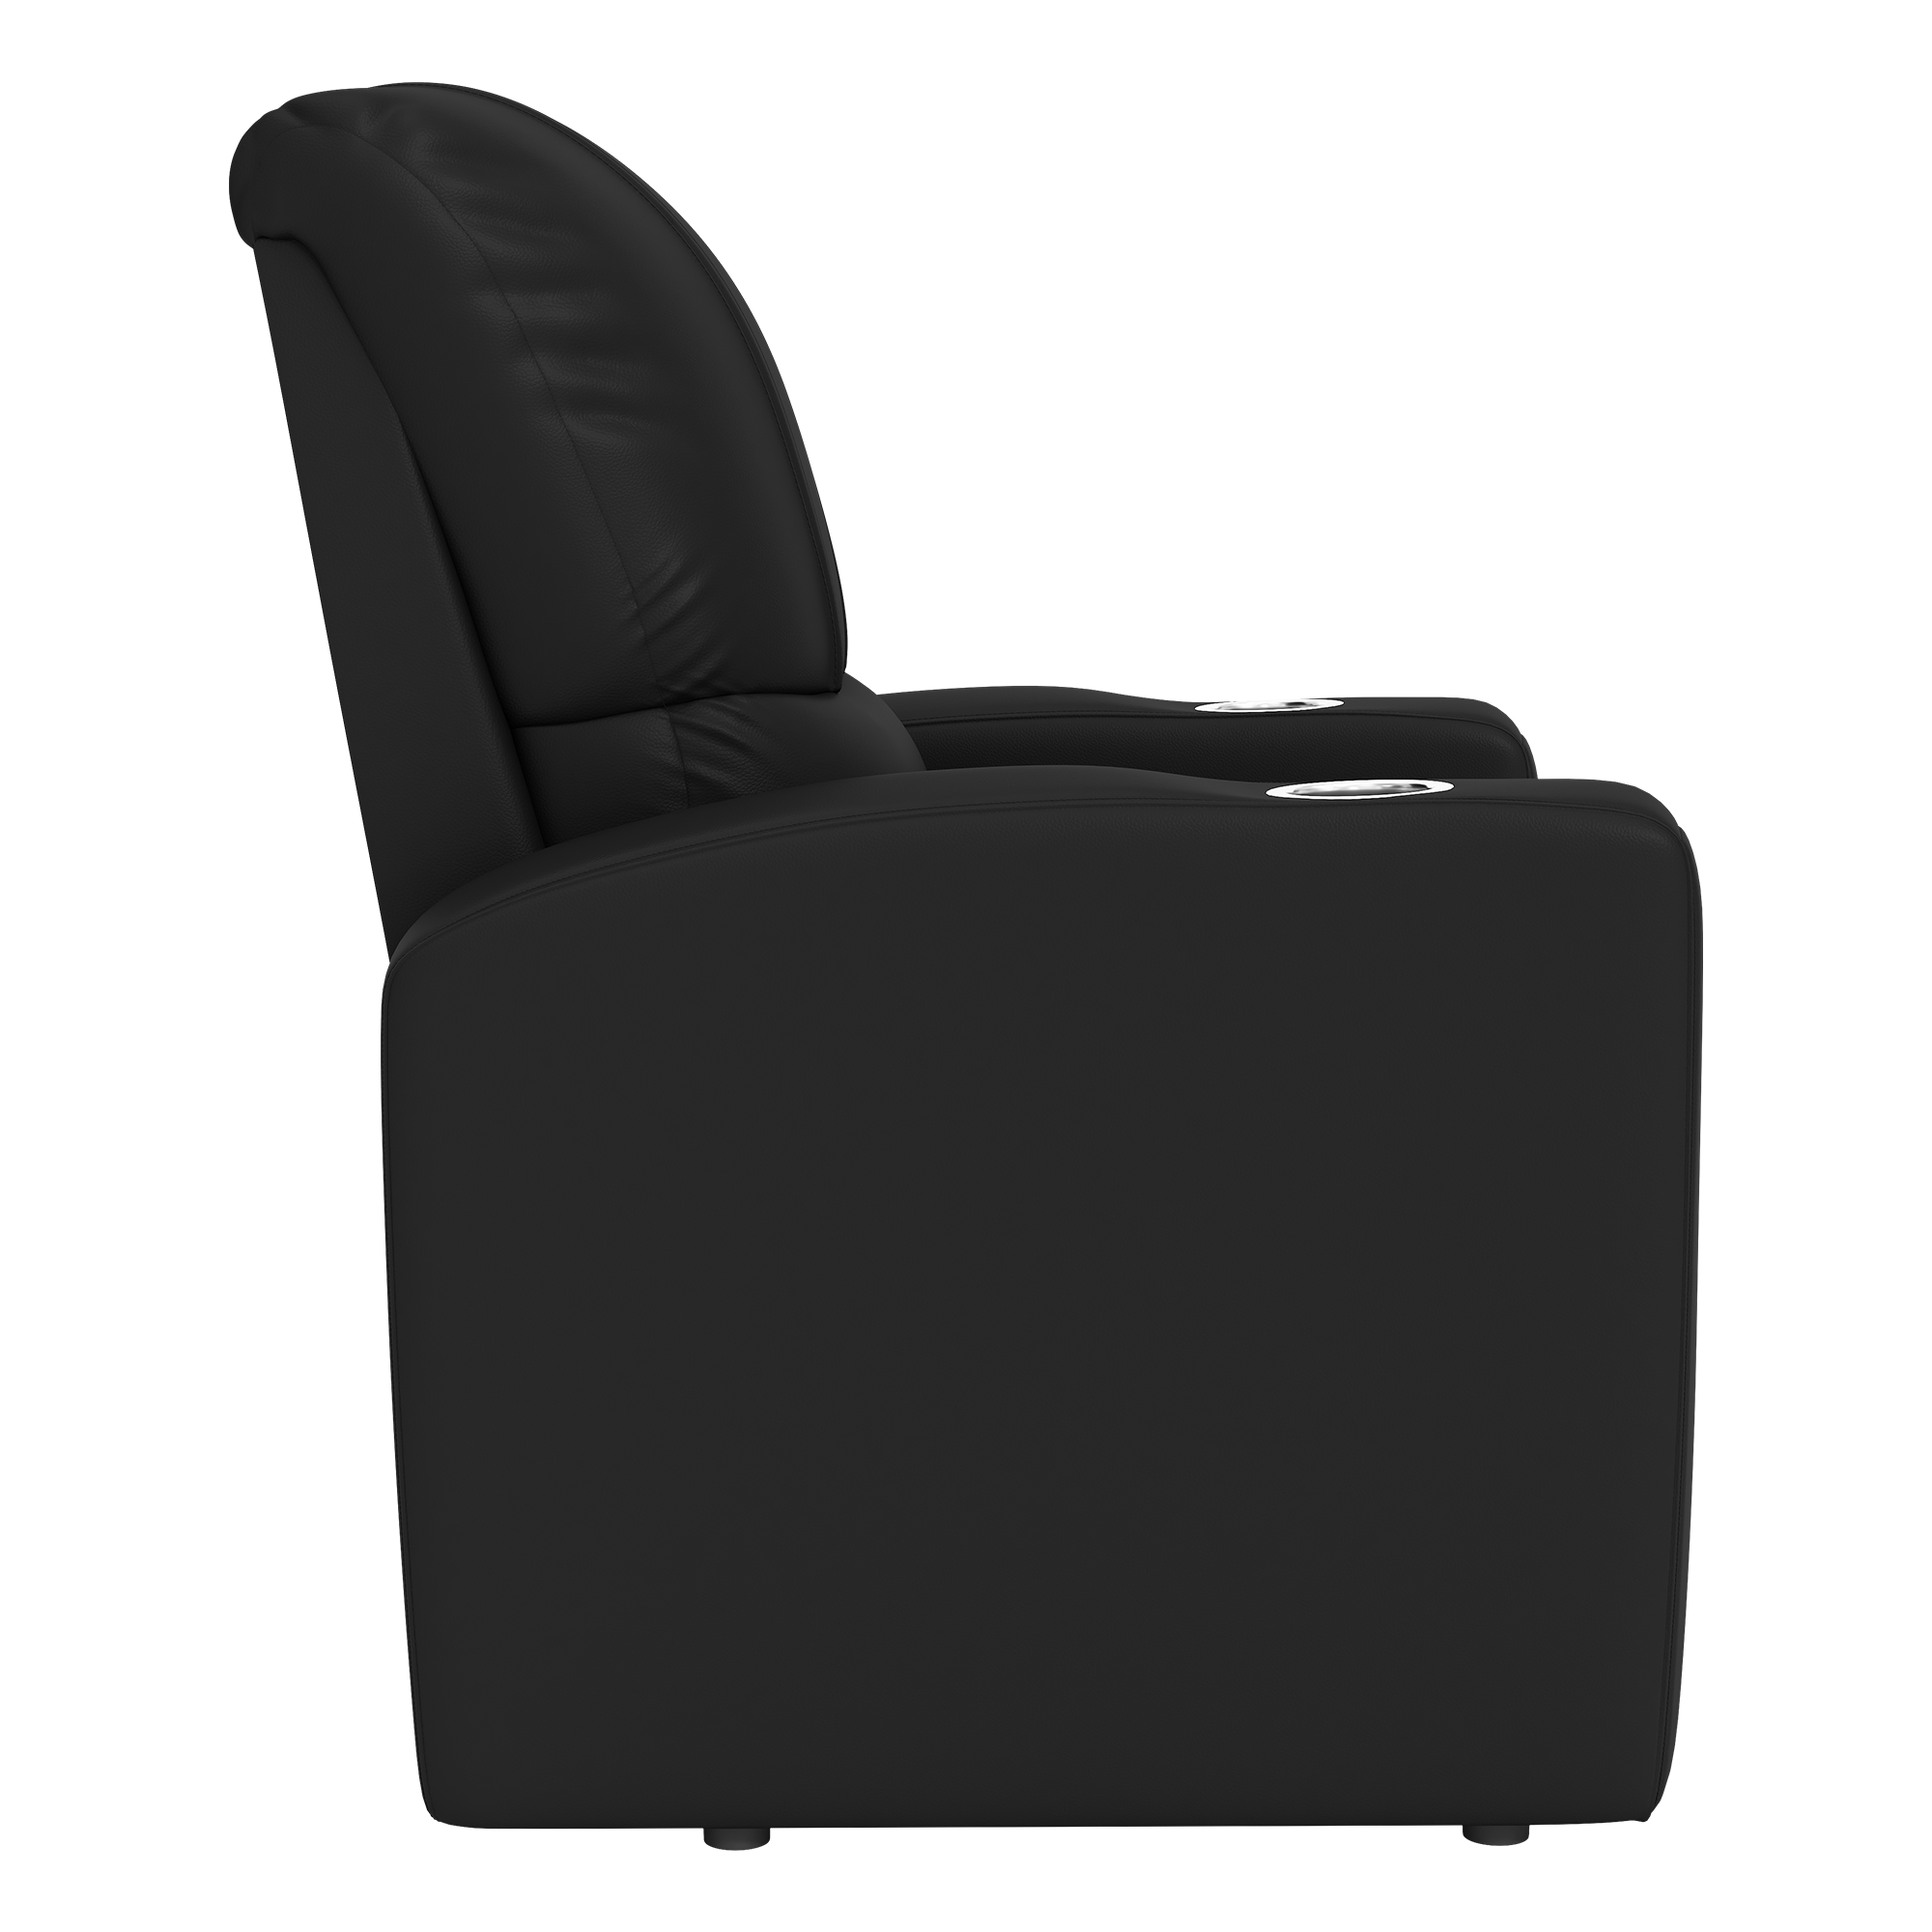 Stealth Recliner with Dallas Cowboys Classic Logo